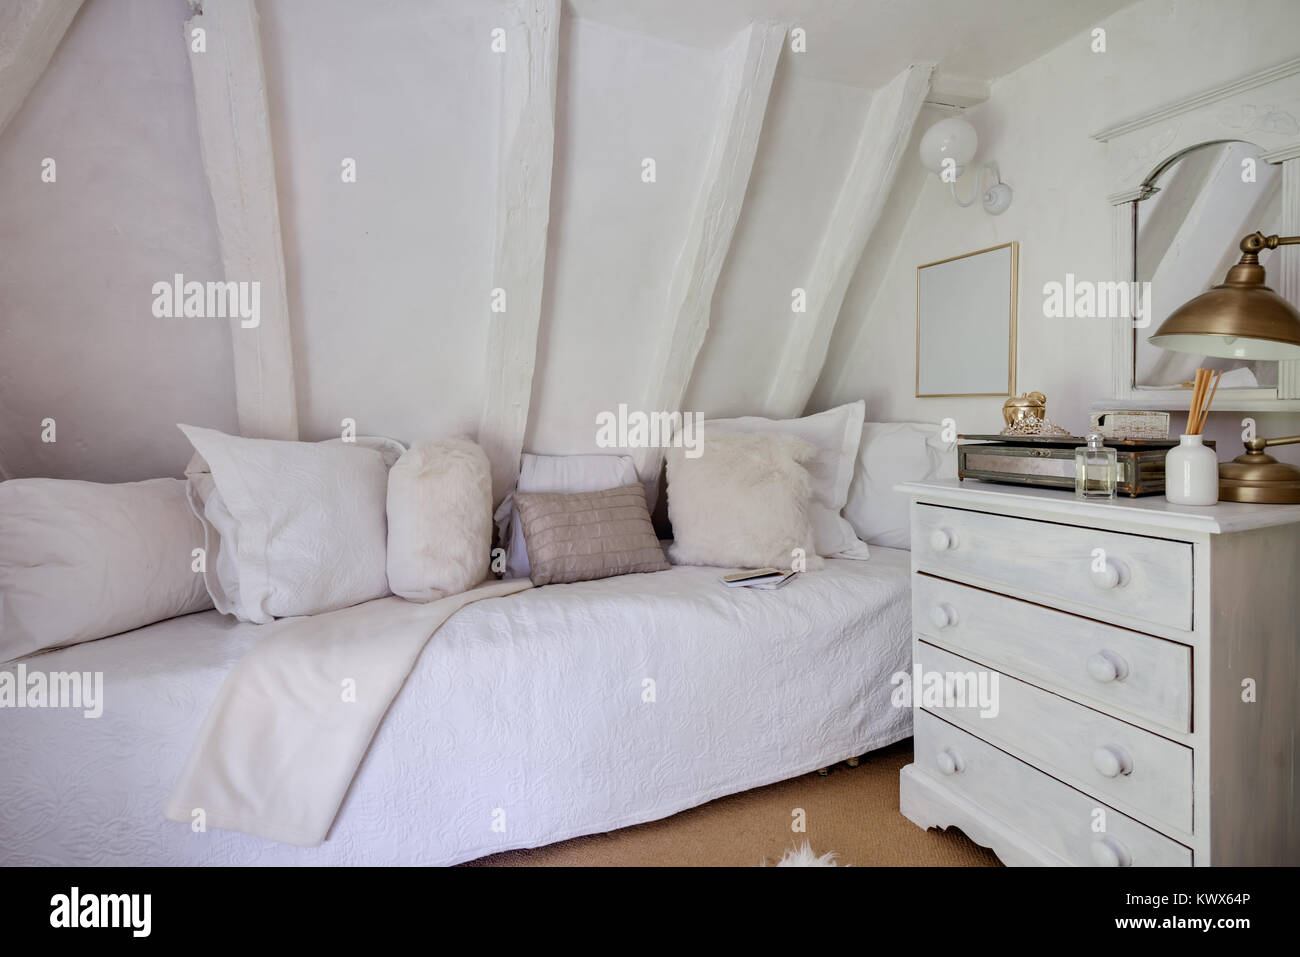 Small cottage bedroom beutifully decorated in shades of white with quilt covered daybed, matching pillows, chest of drawers, mirror, perfume botttle a Stock Photo